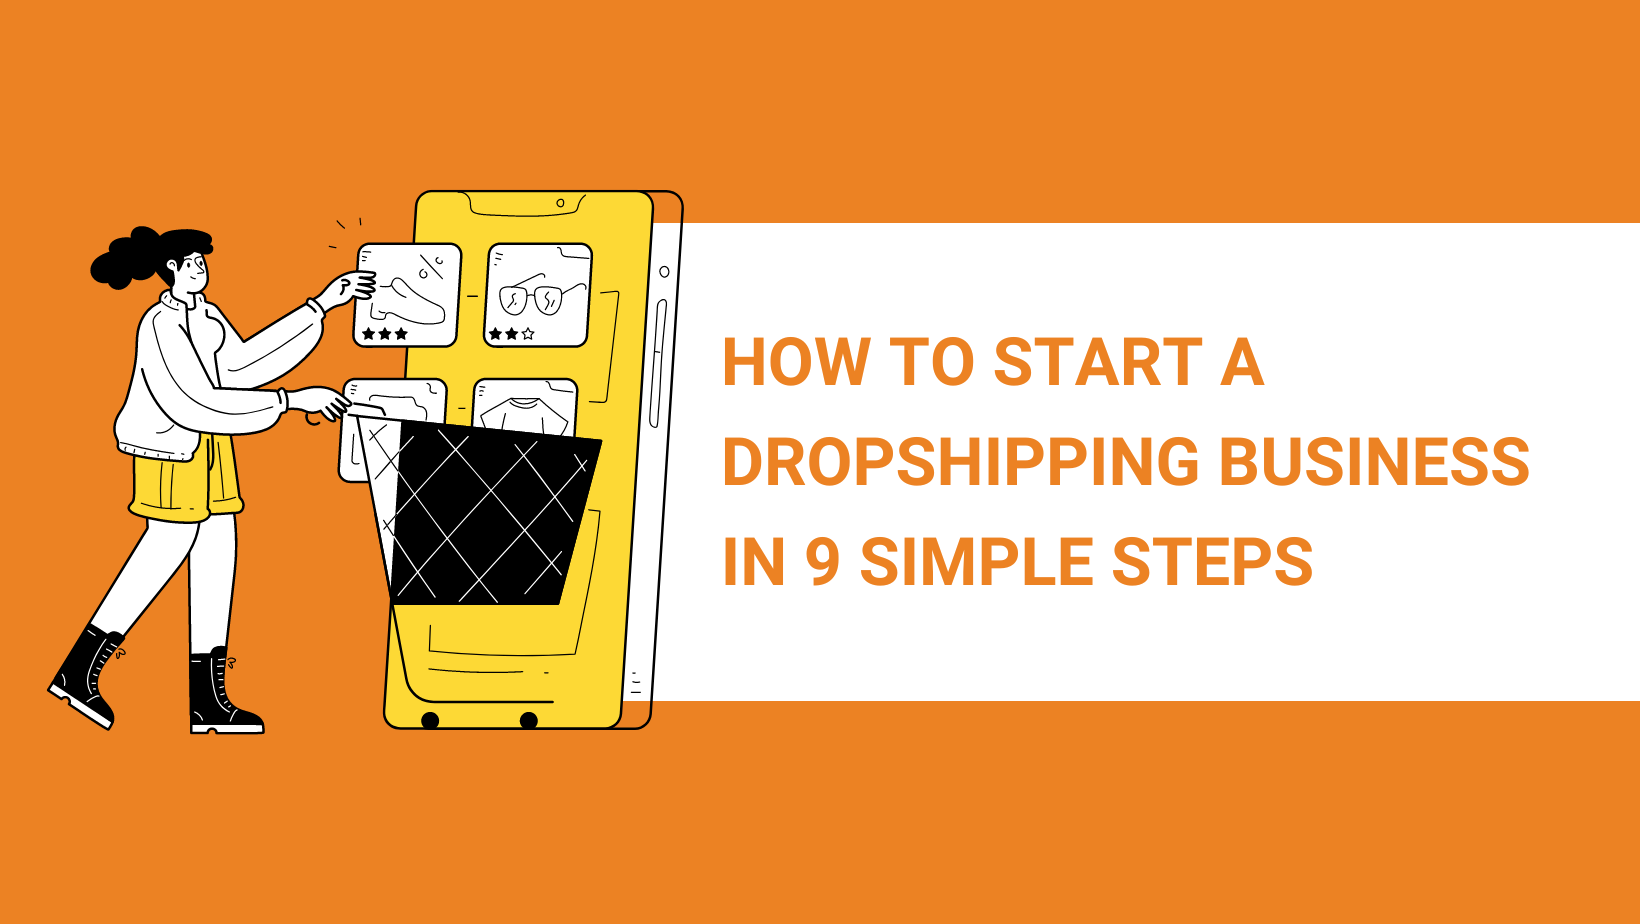 HOW TO START A DROPSHIPPING BUSINESS IN 9 SIMPLE STEPS